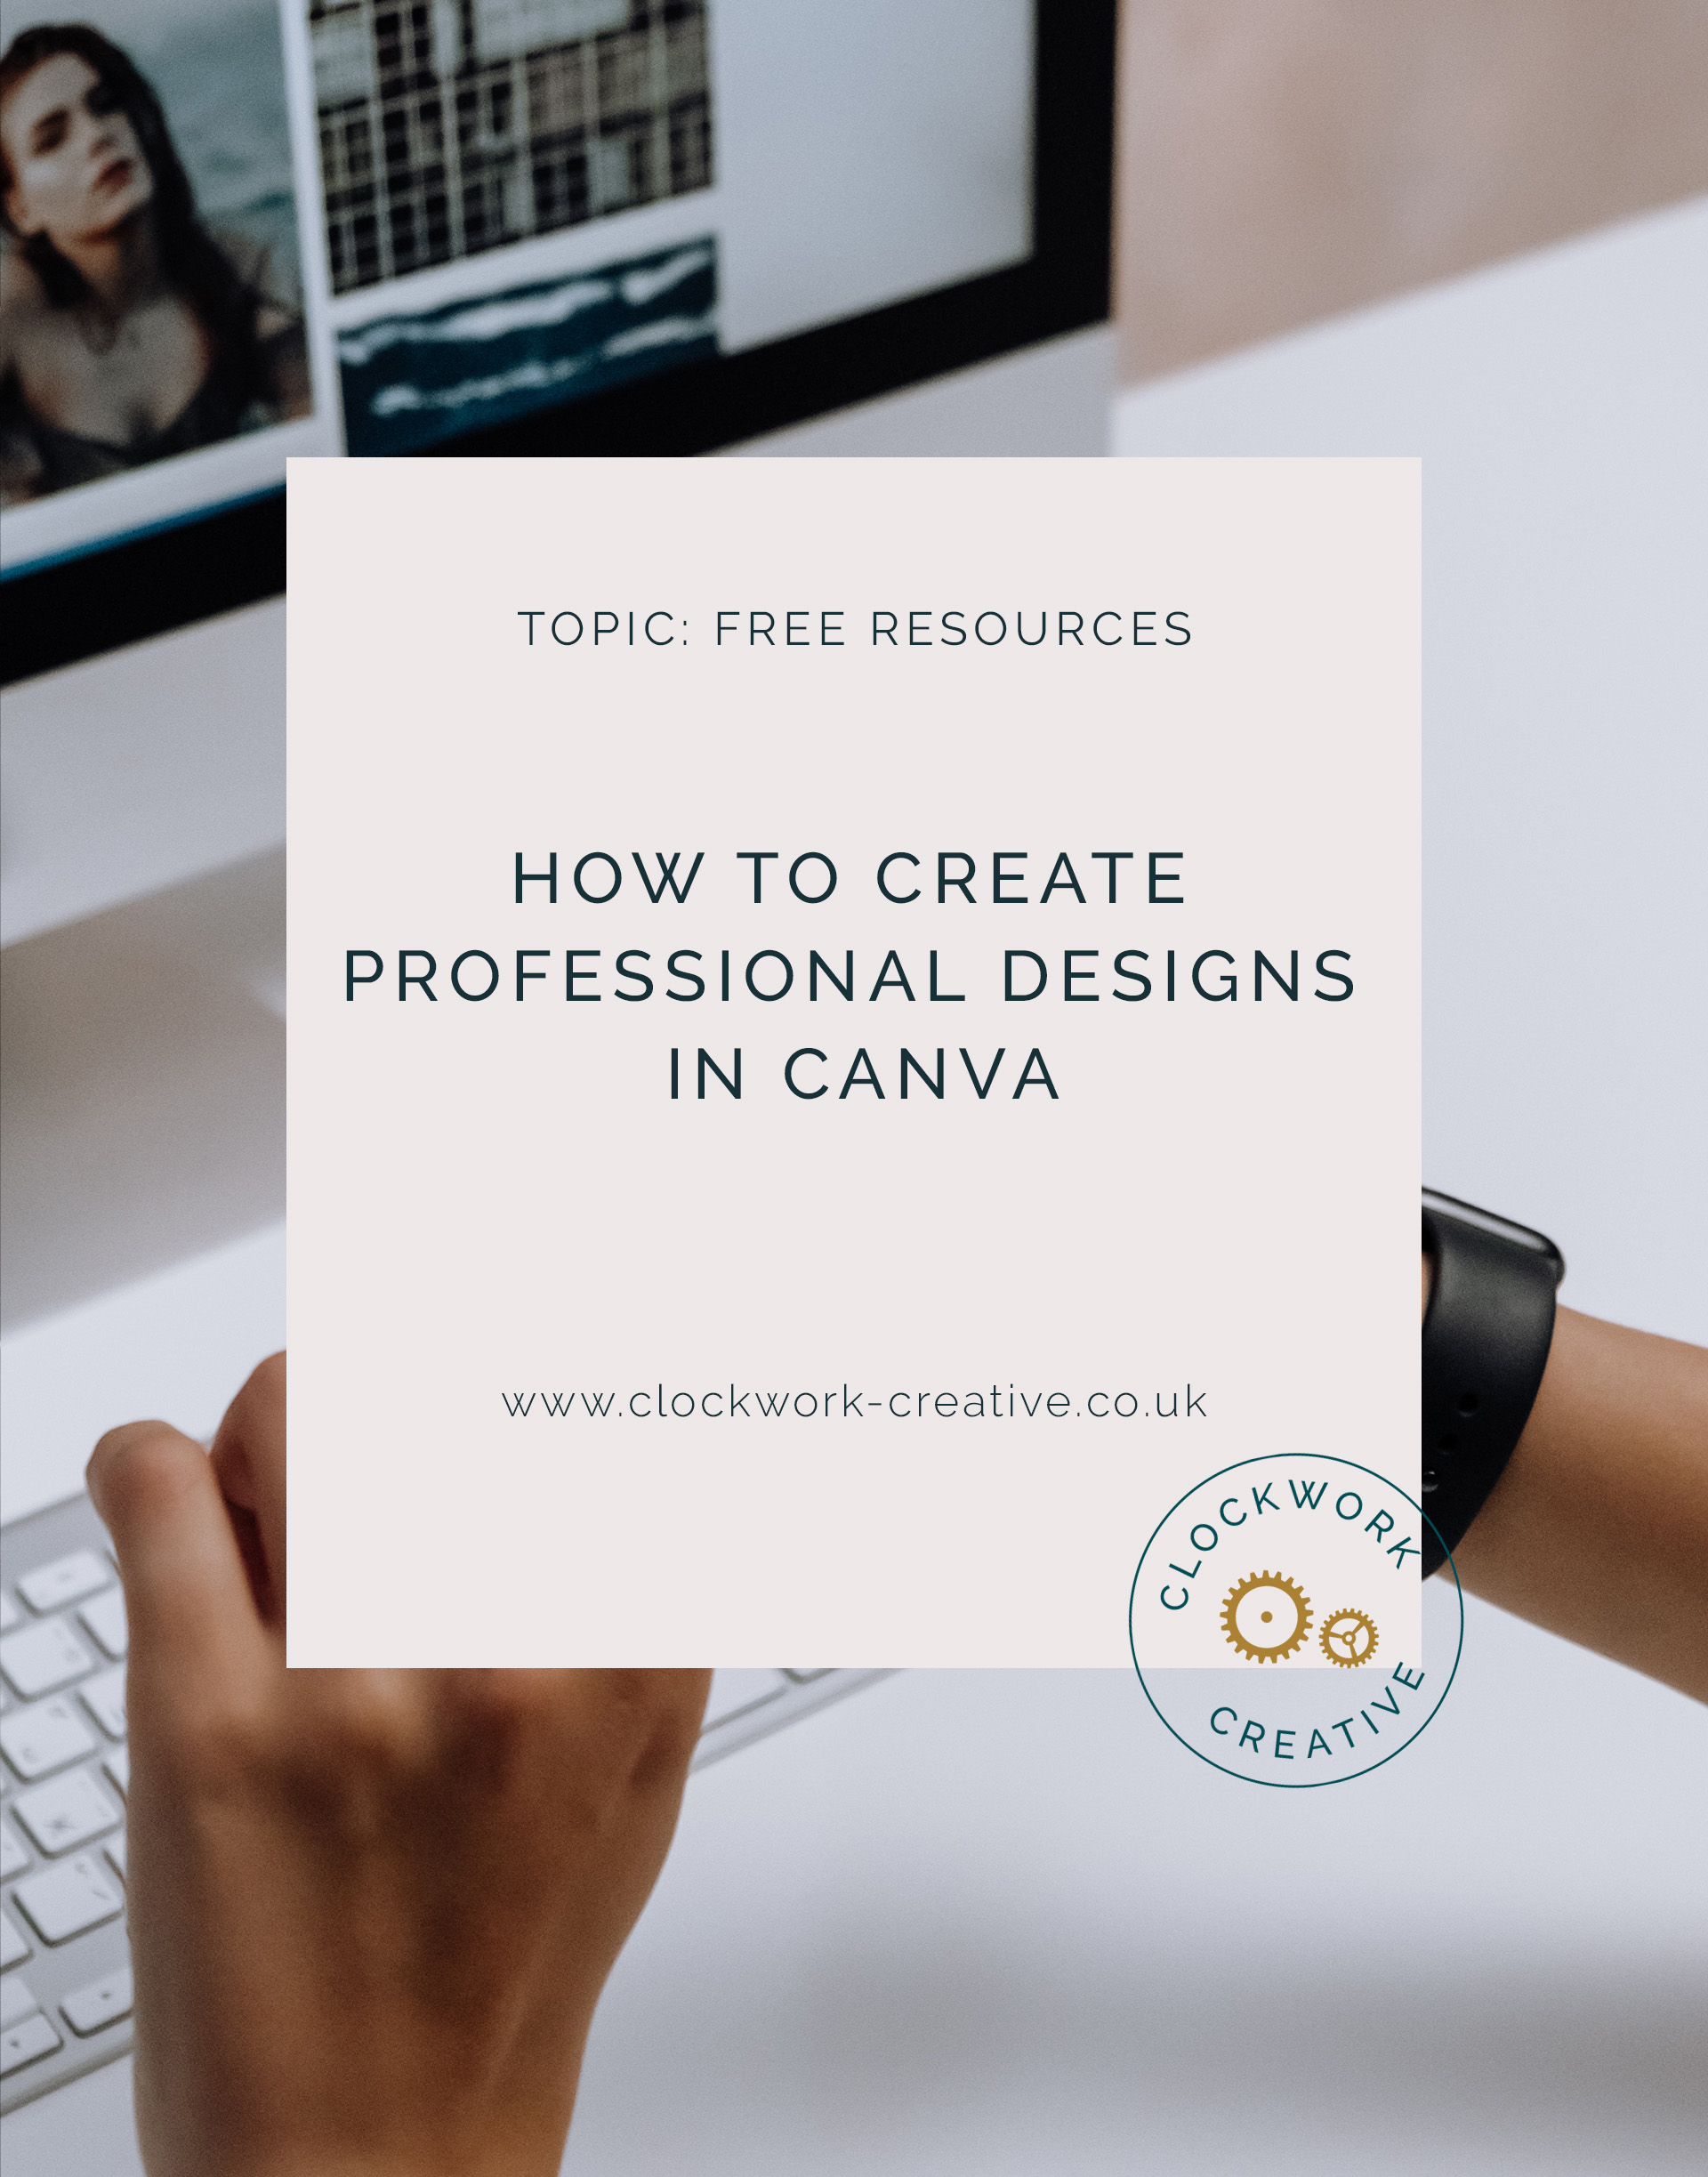 How to create professional designs in Canva